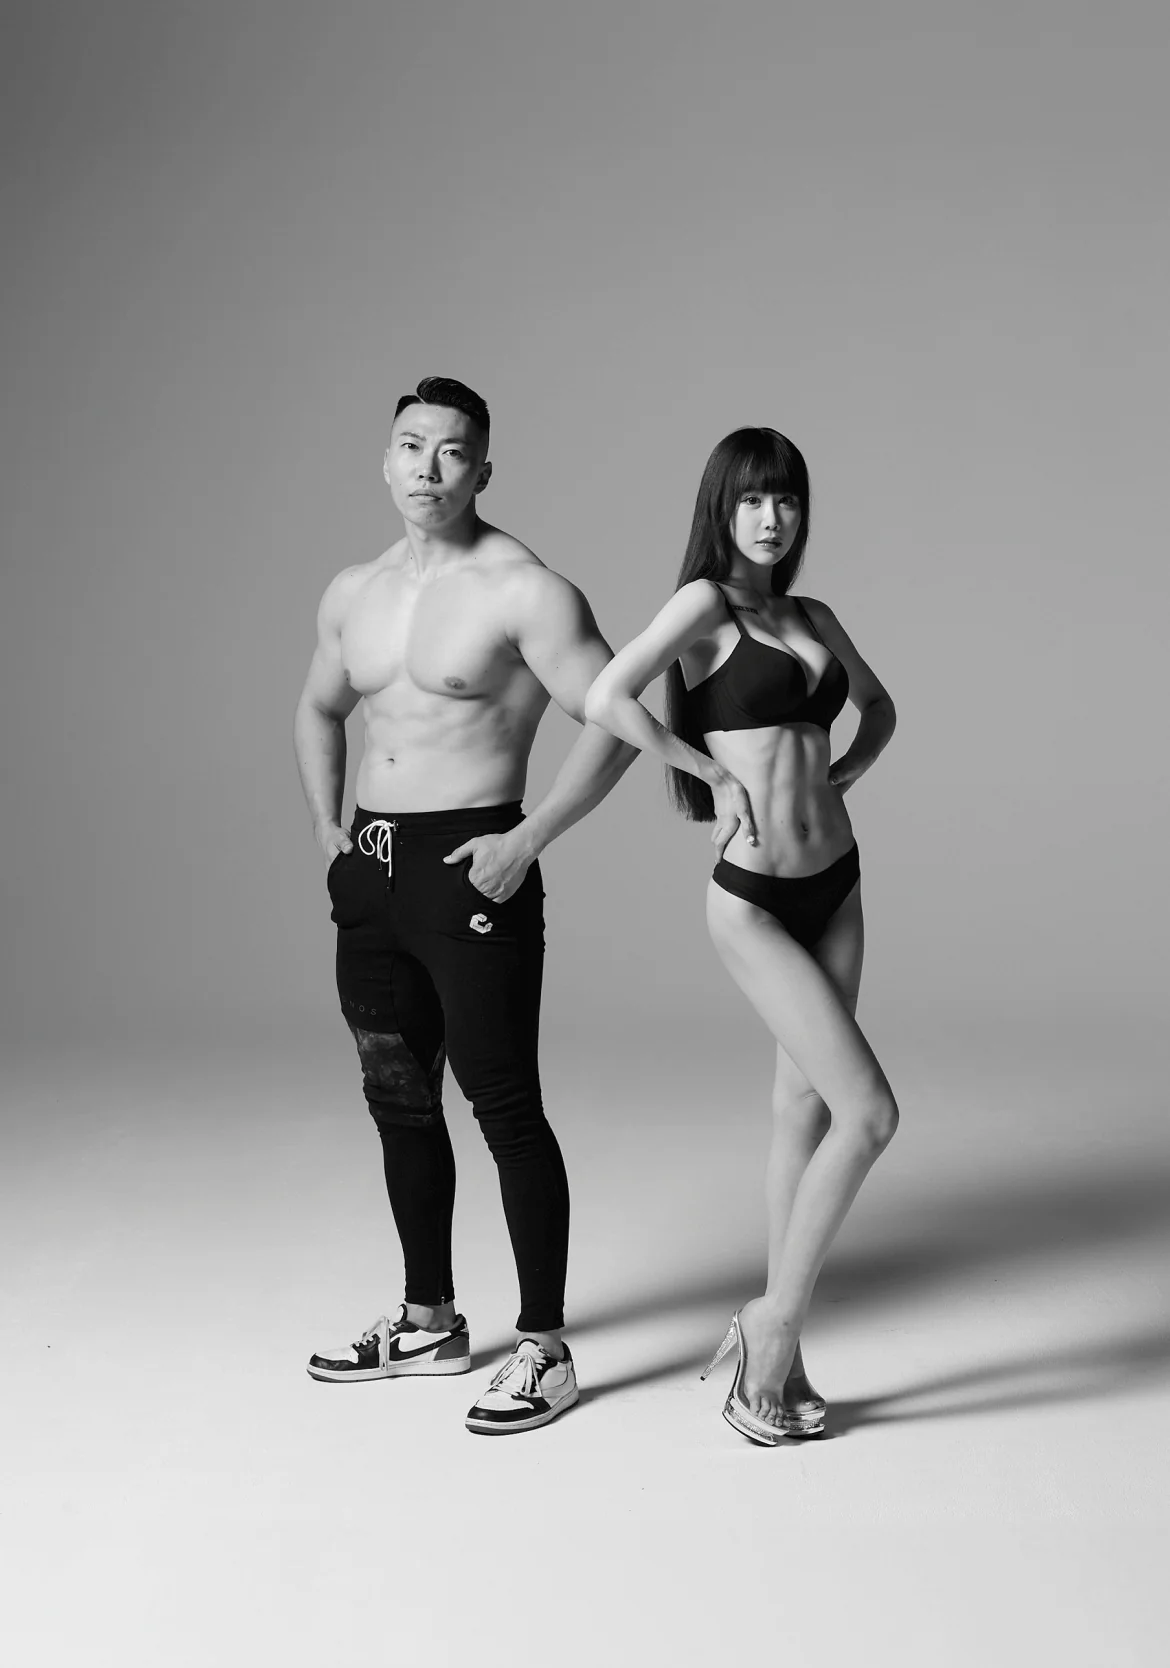 Chance Personal Gym, two people posing